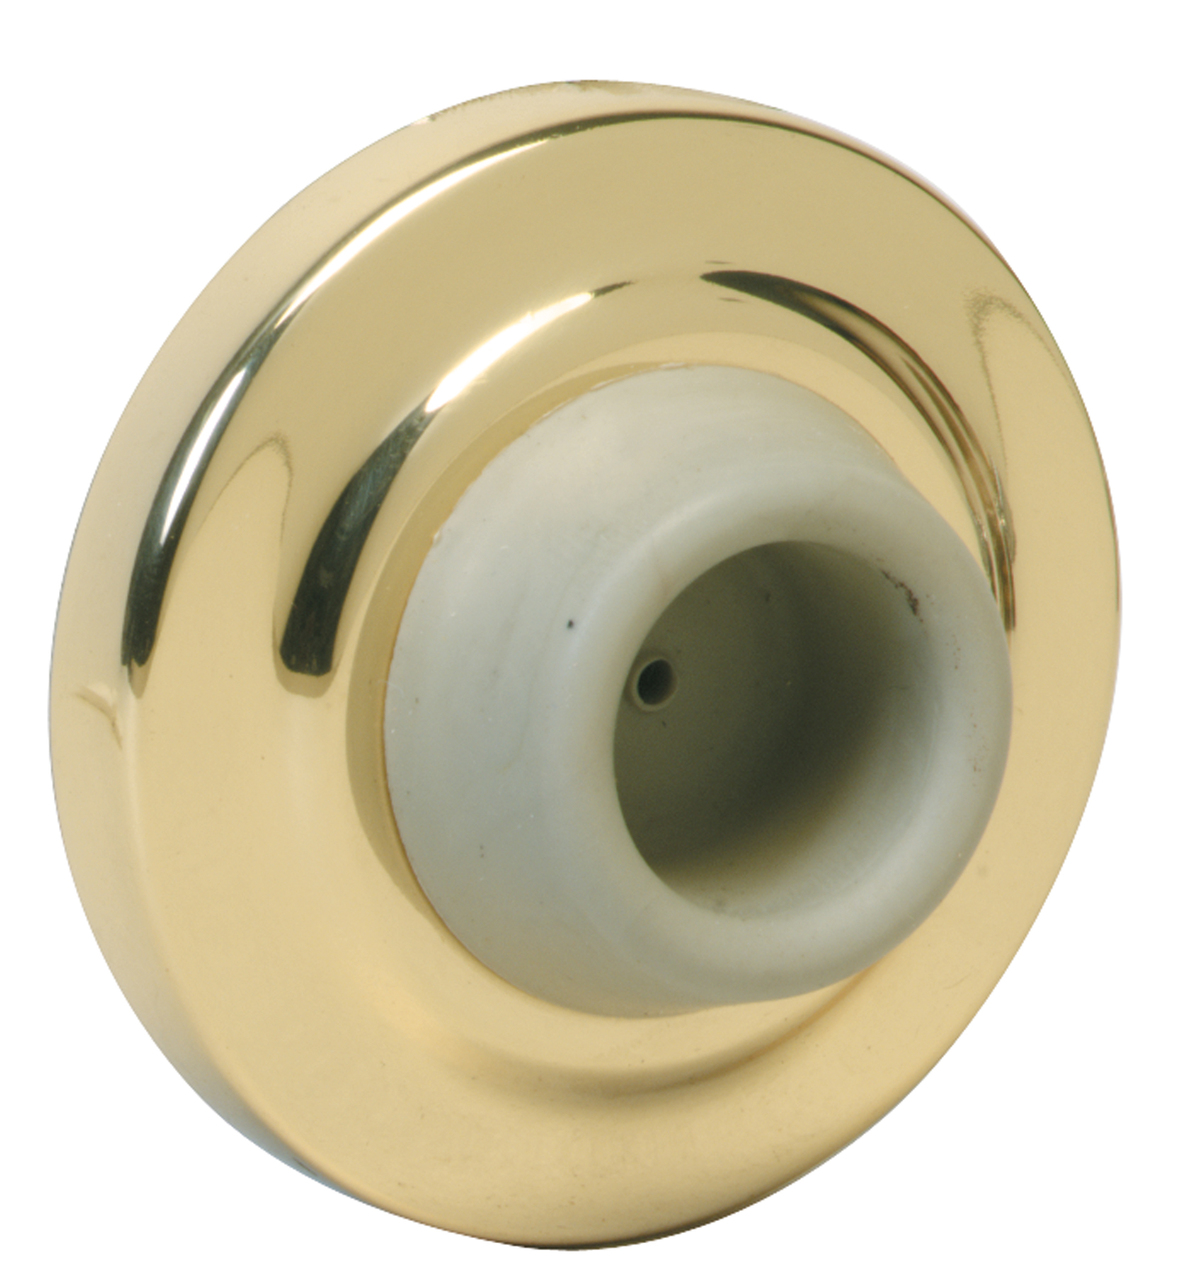 Ives Wall Bumpers Wall Bumpers Concave Rubber Bumper Avoids Damage To Locks With Projecting Buttons, Packed With Wood Screw And Plastic Anchor - Ws401ccv